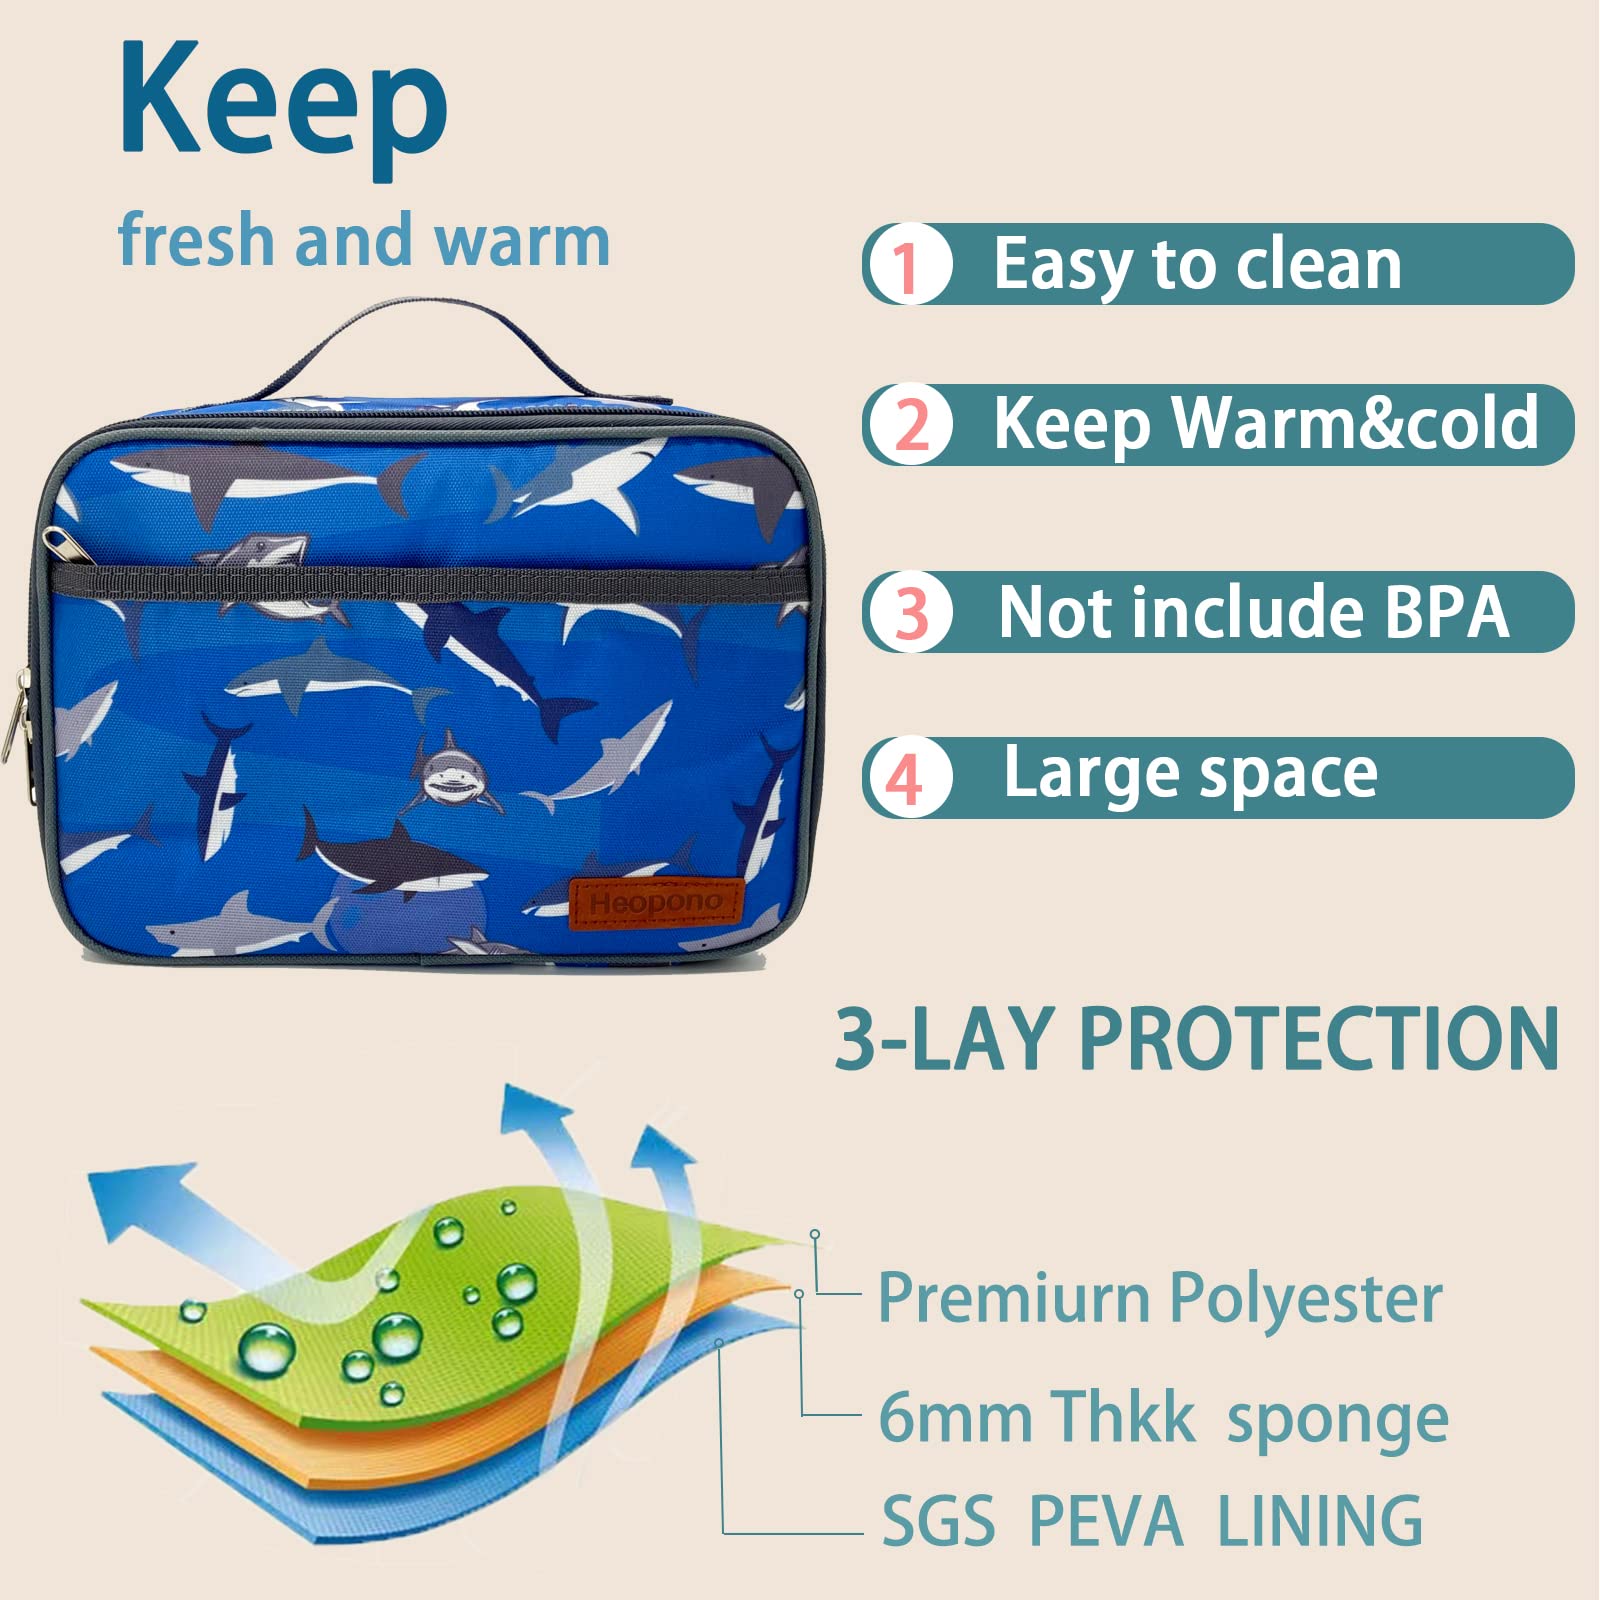 Kulle shark lunch box for Kids boys Insulated Lunch bag for toddler,Washable and Reusable Lunch Boxes for School, Work, Picnic or Travel,Astronaut Camo Space Dinosaur (Shark)